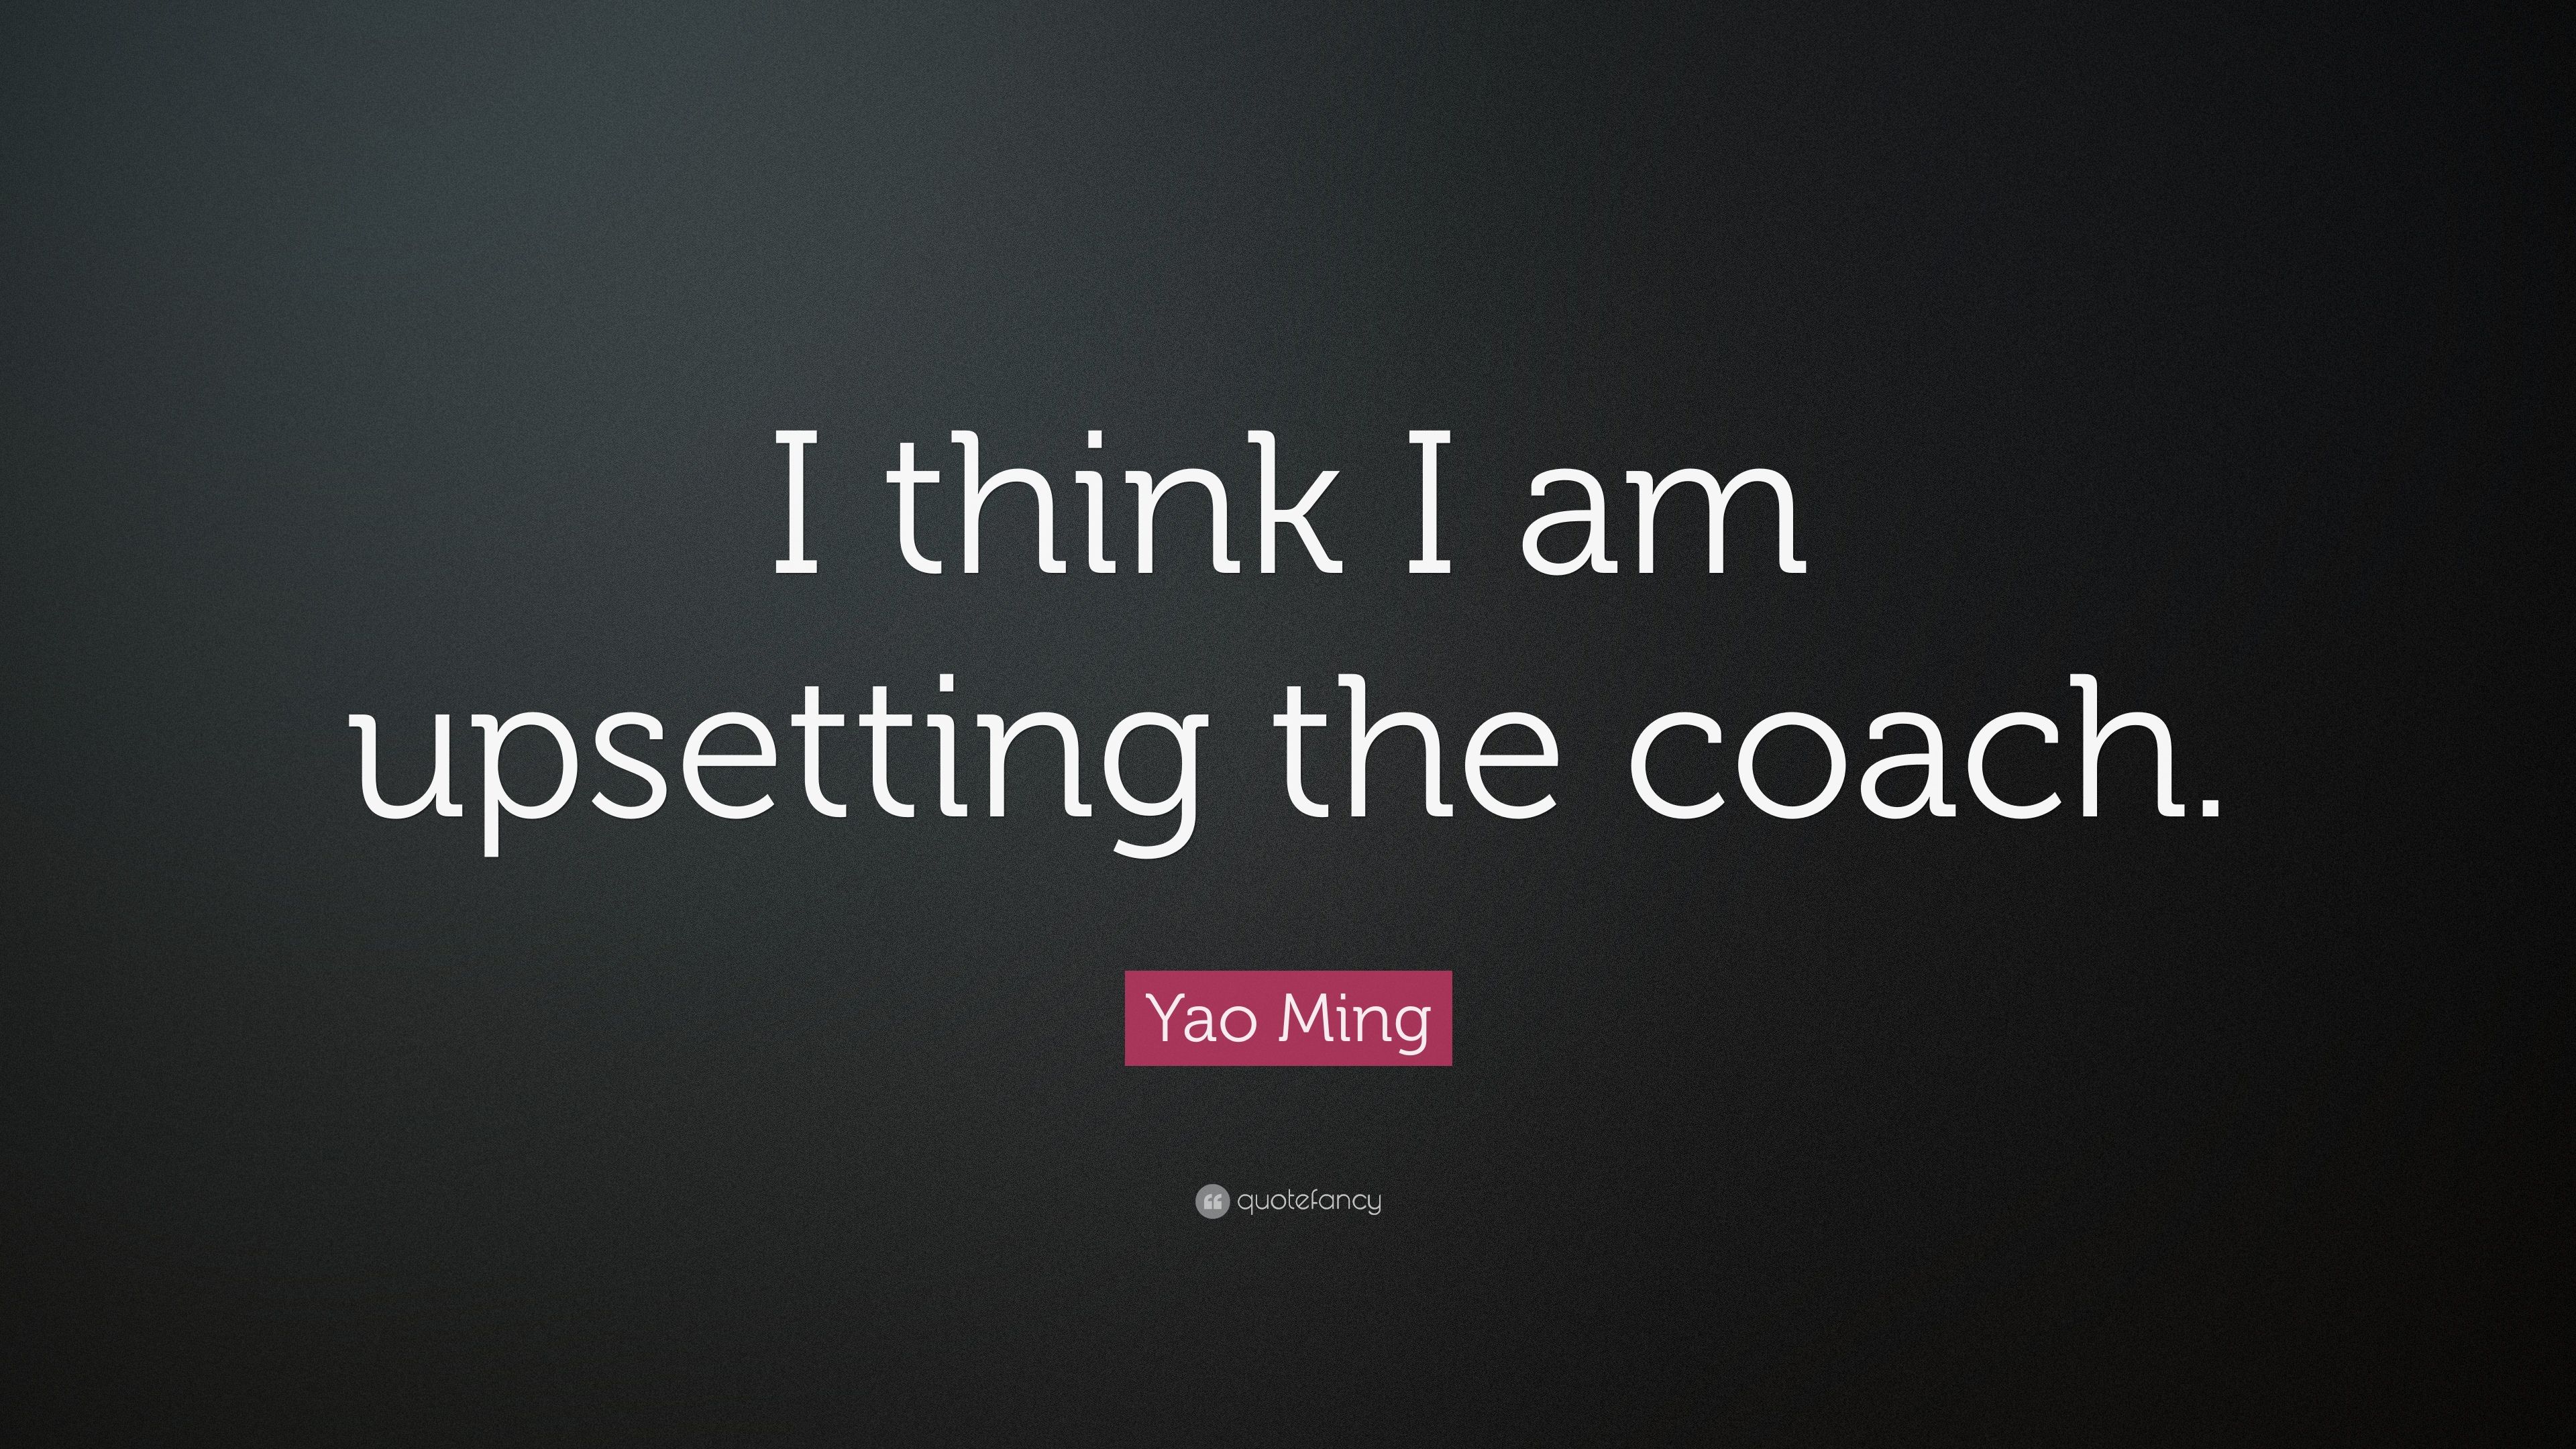 Yao Ming Quote: “I think I am upsetting the coach.” 7 wallpaper